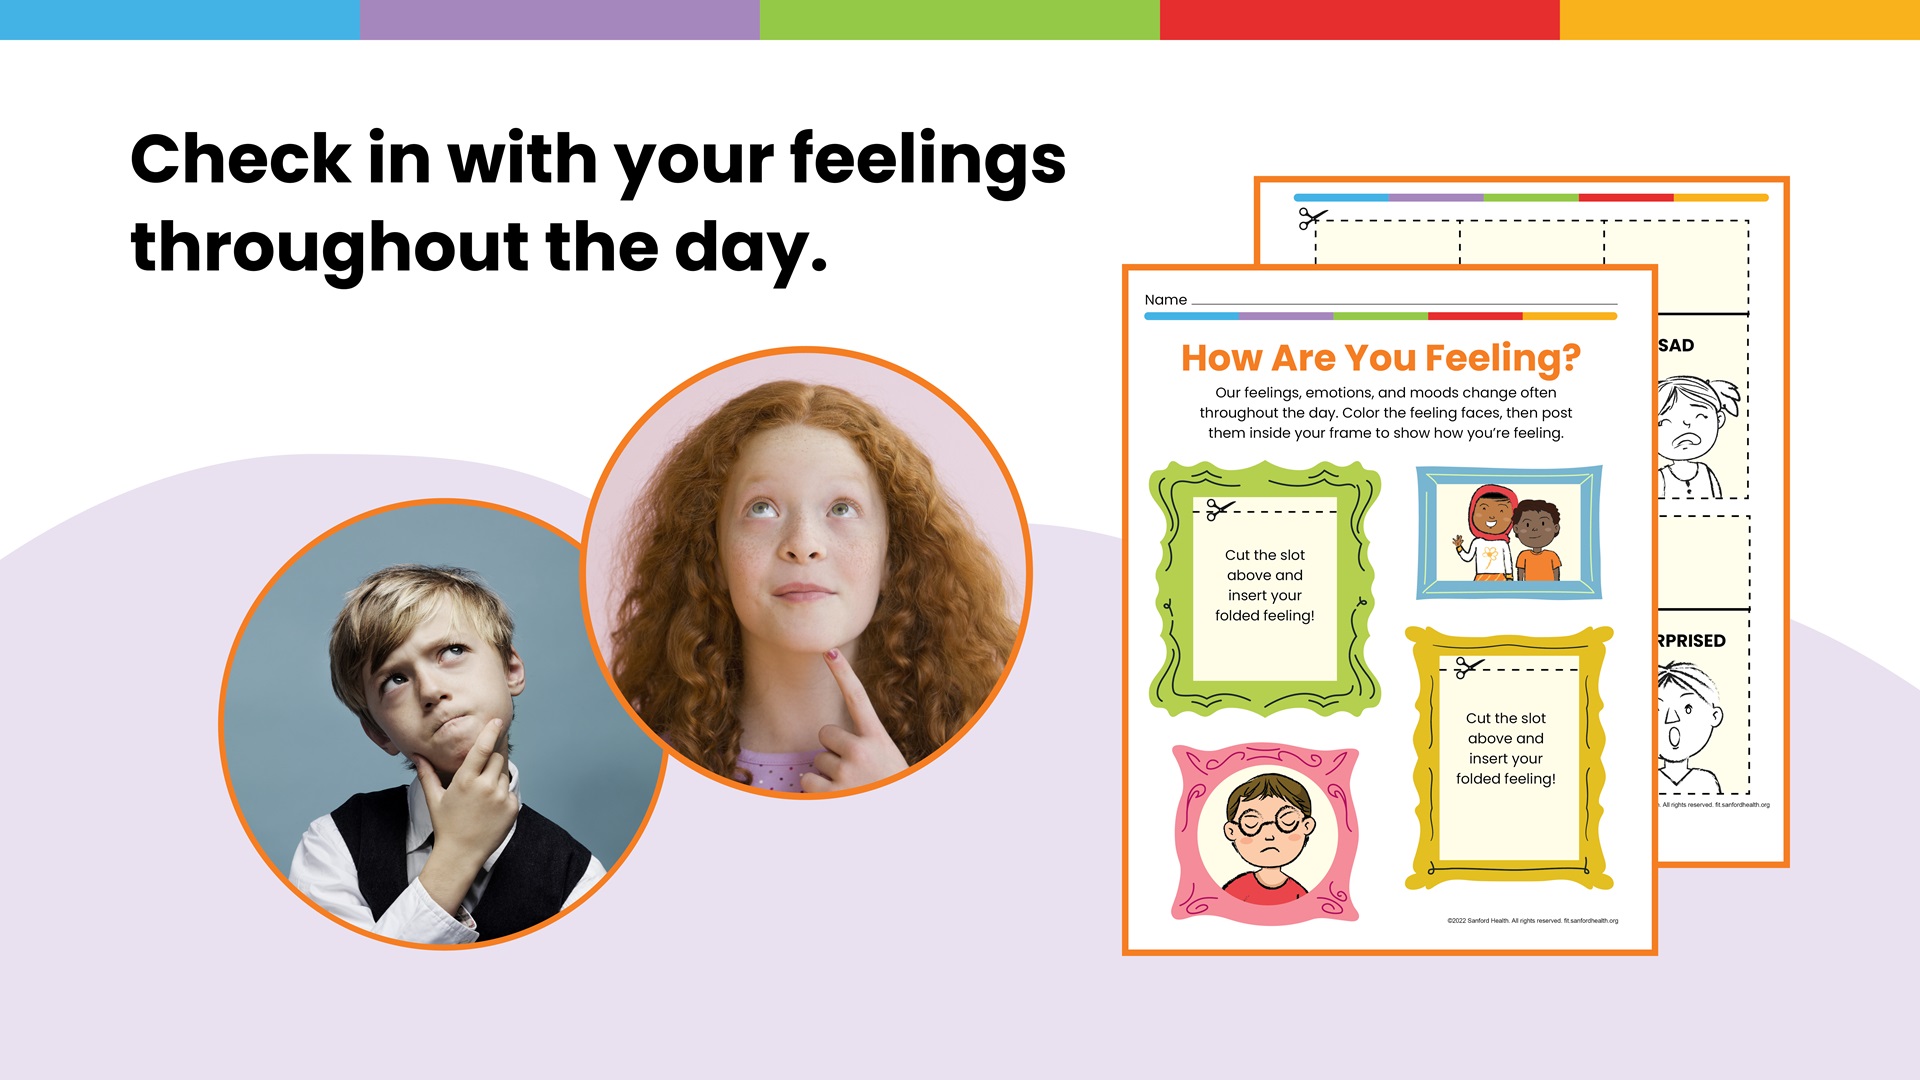 Helping Kids Understand the Connection Between Feelings and Mood